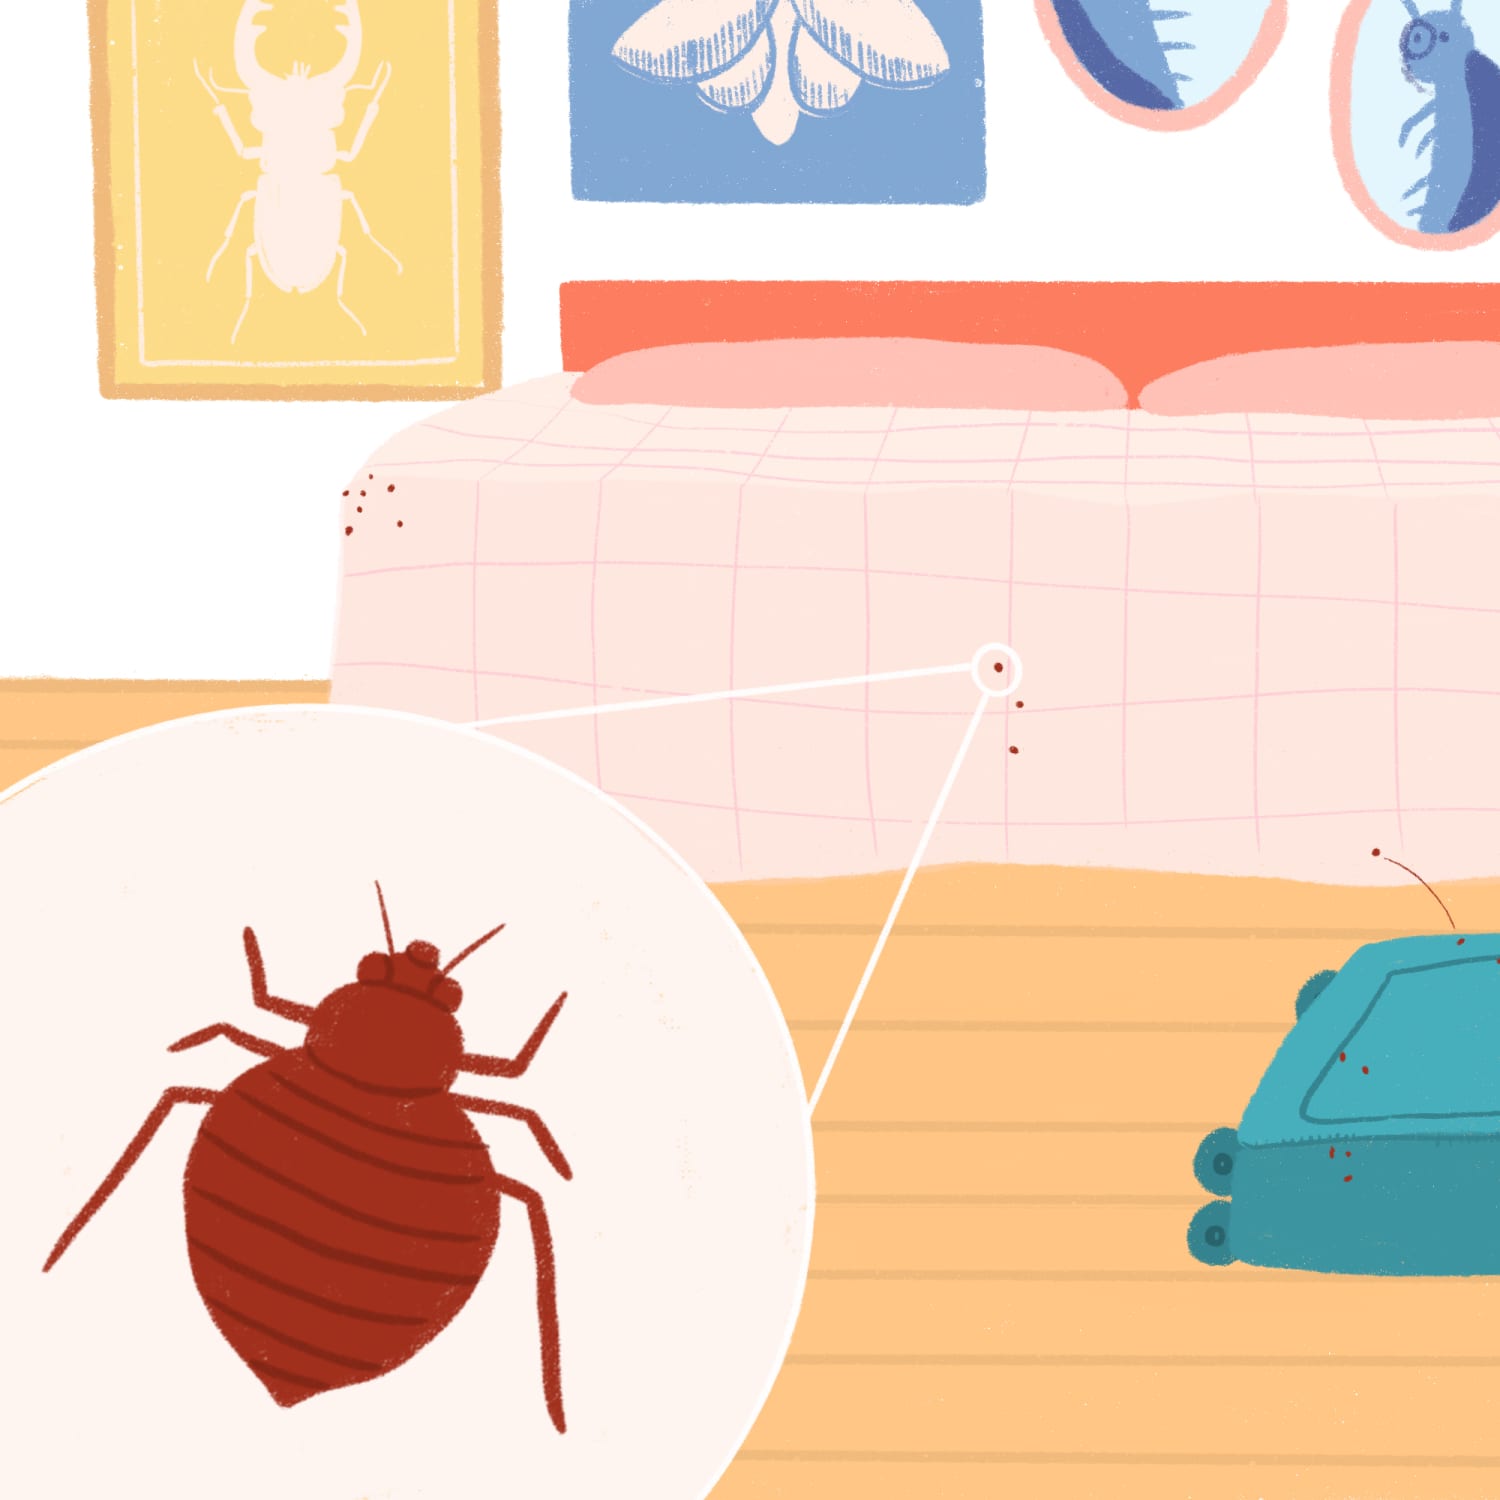 How to Get Rid of Bed Bugs: A DIY Guide  Bed bugs treatment, Rid of bed  bugs, Bed bugs